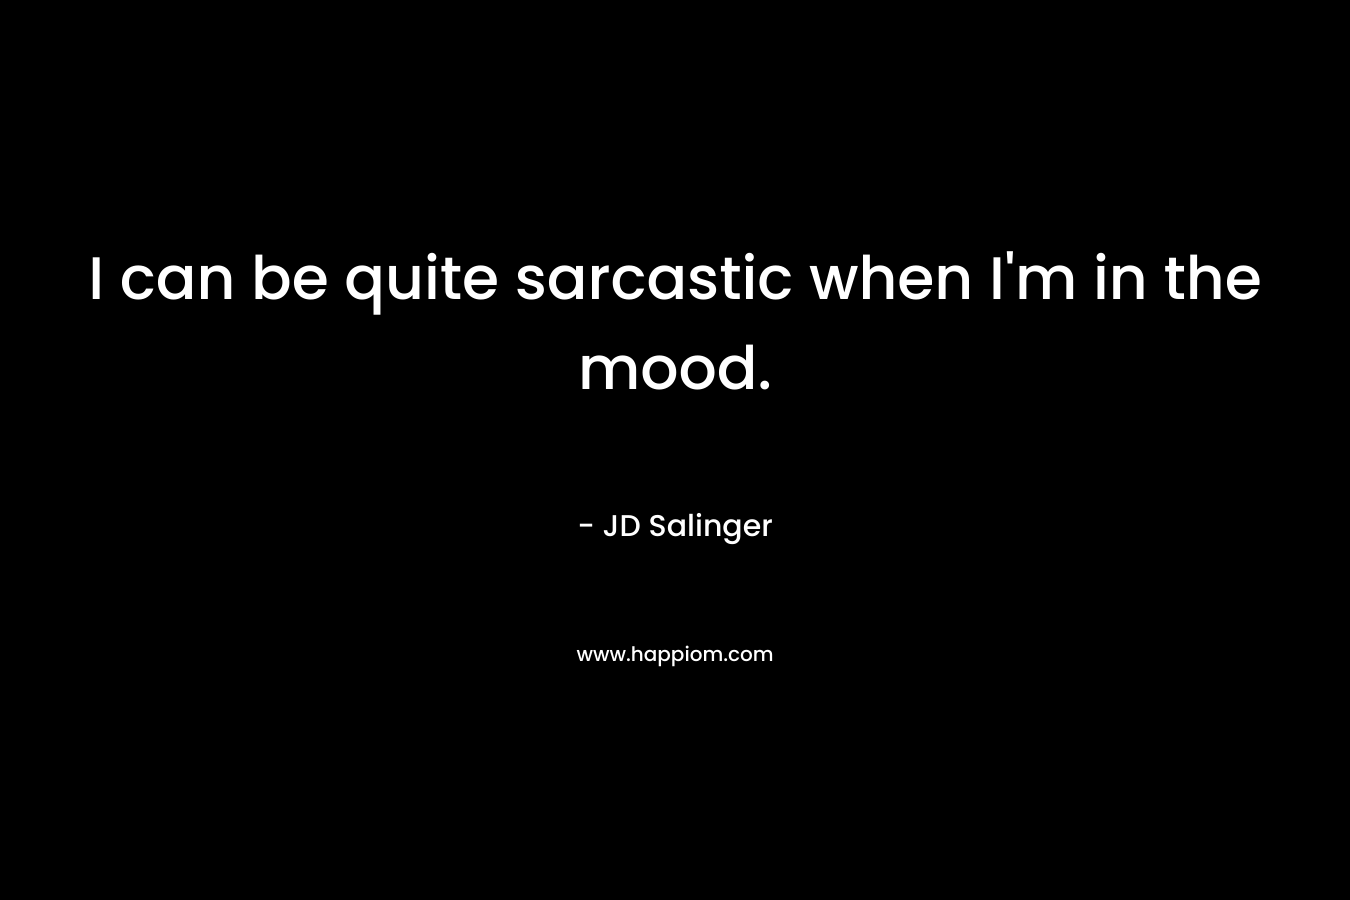 I can be quite sarcastic when I'm in the mood.